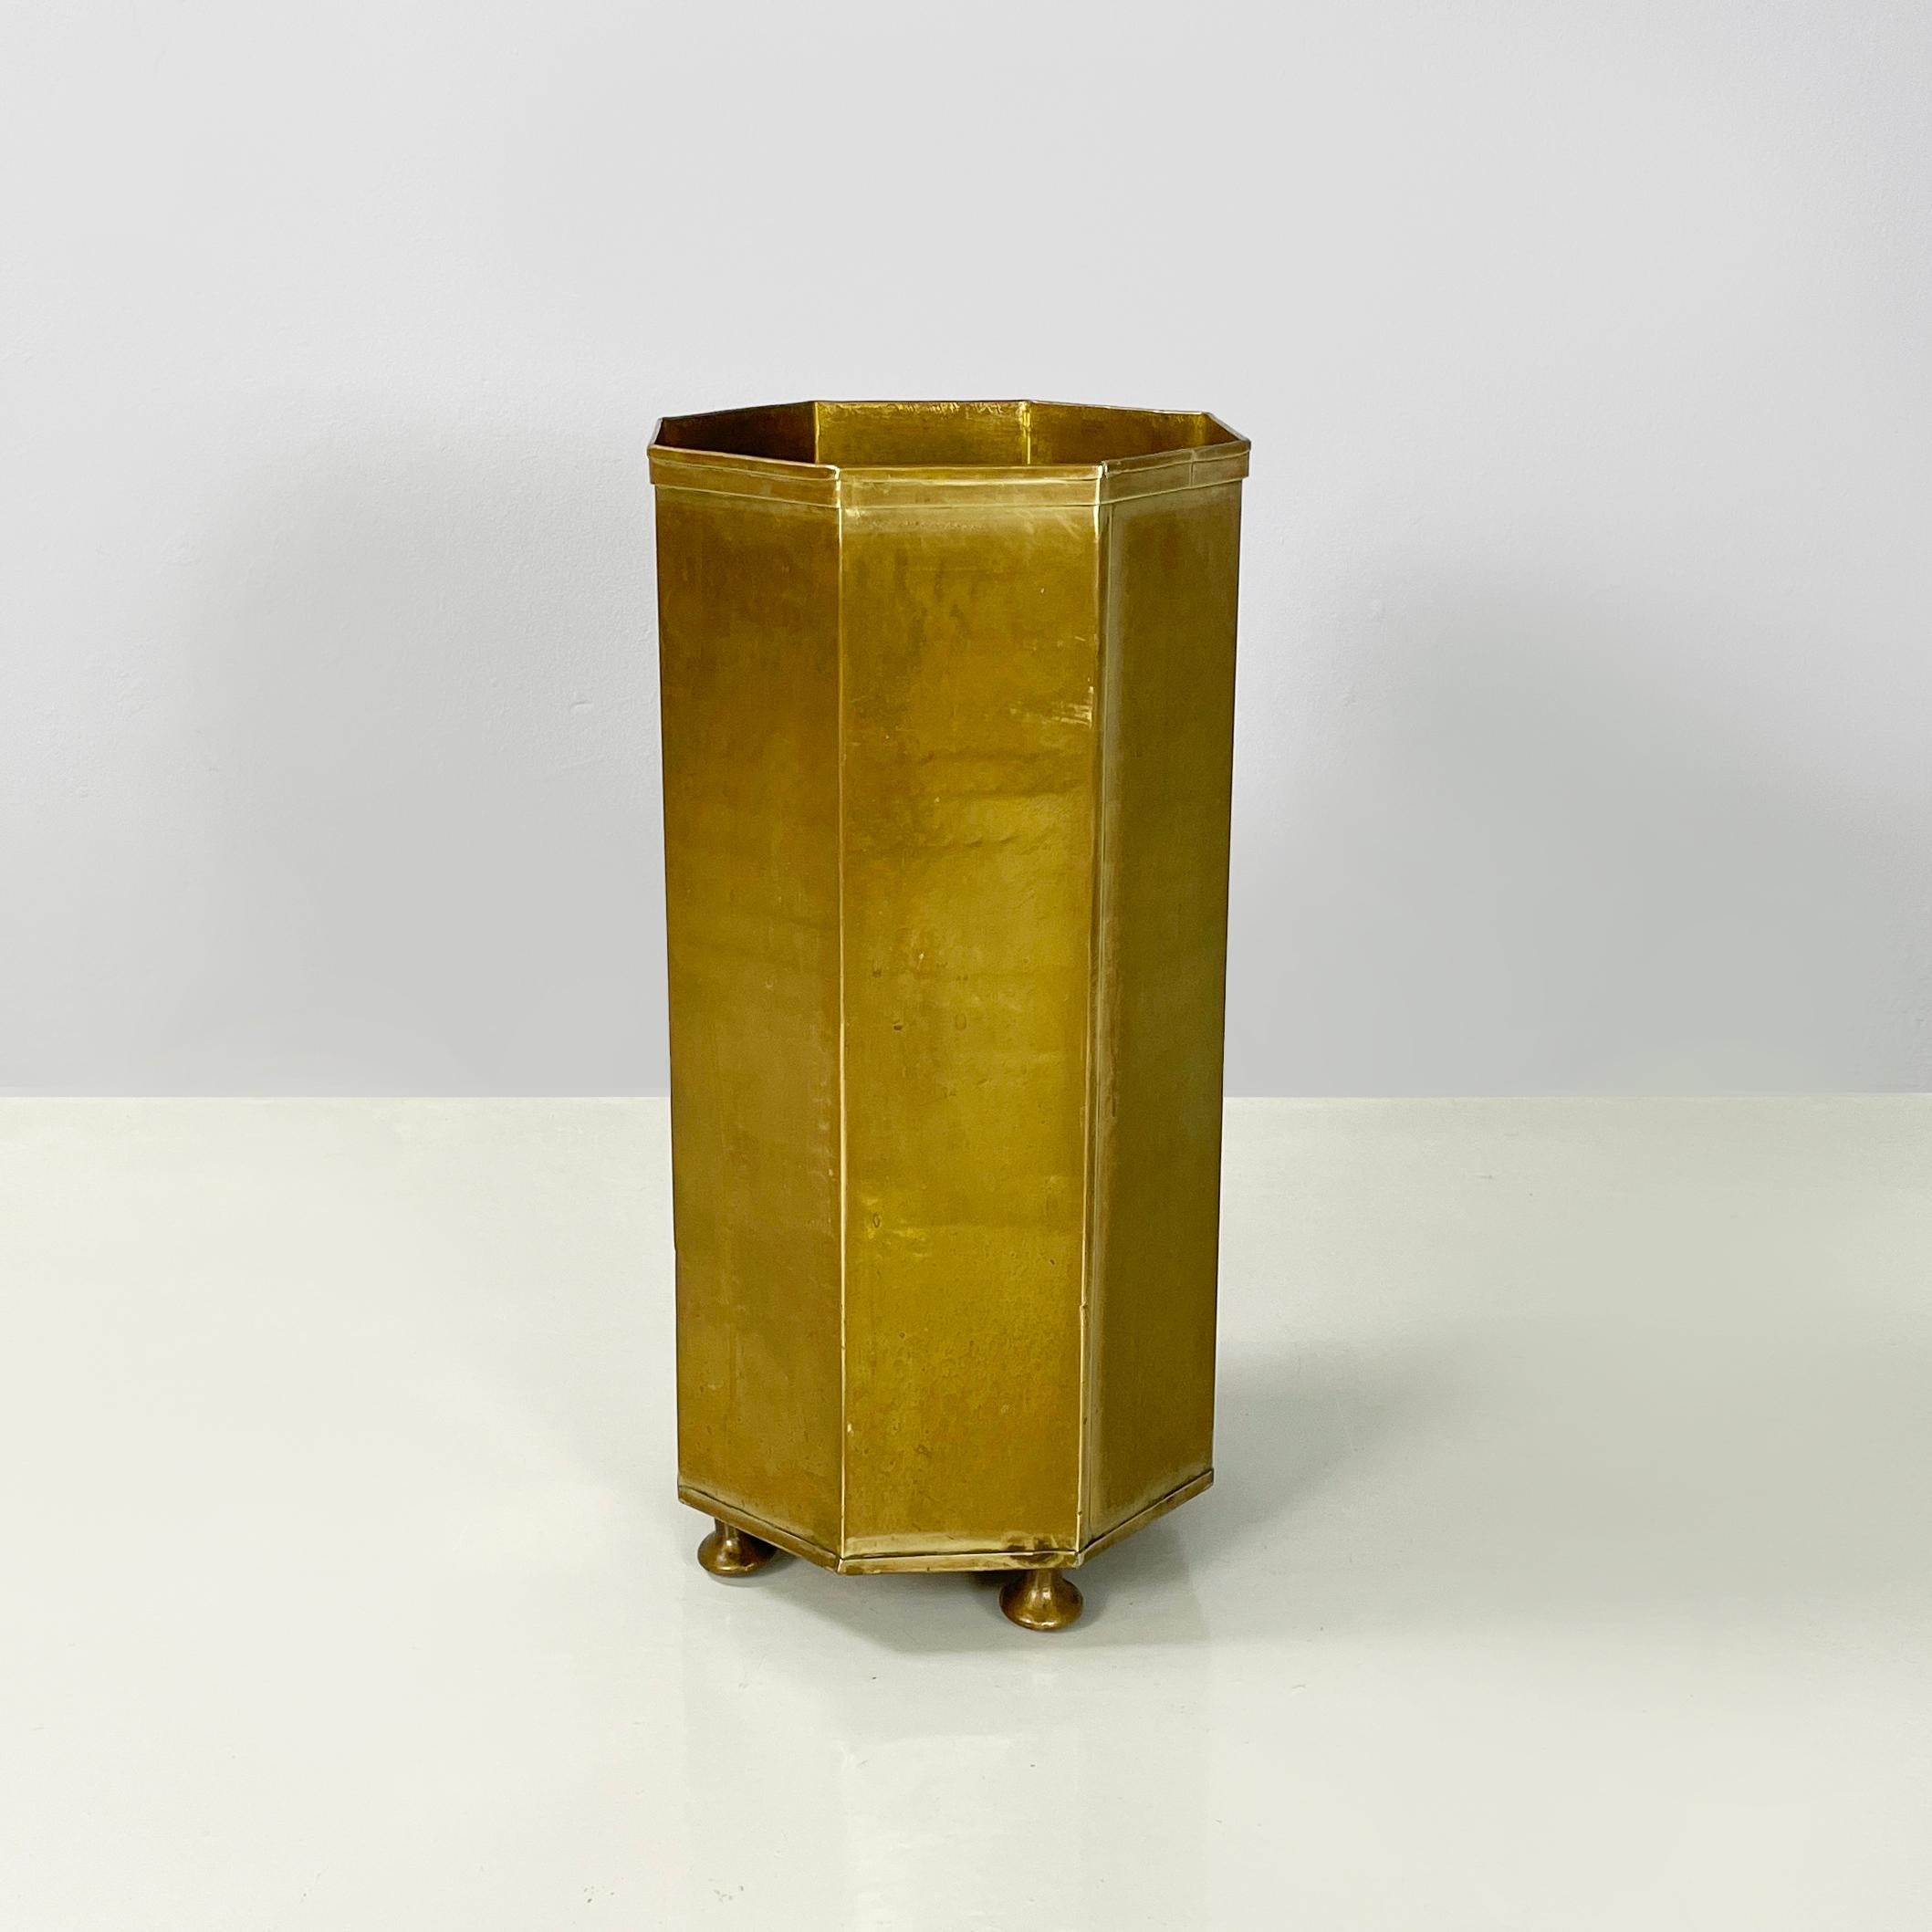 Italian mid-century modern Hexagonal umbrella stand in brass, 1950s
Umbrella stand with hexagonal base entirely in brass. Round feet at the base.
1950s
Good condition, in patina. Light signs of age.
Measurements in cm 27x27x54h
The umbrella stand is